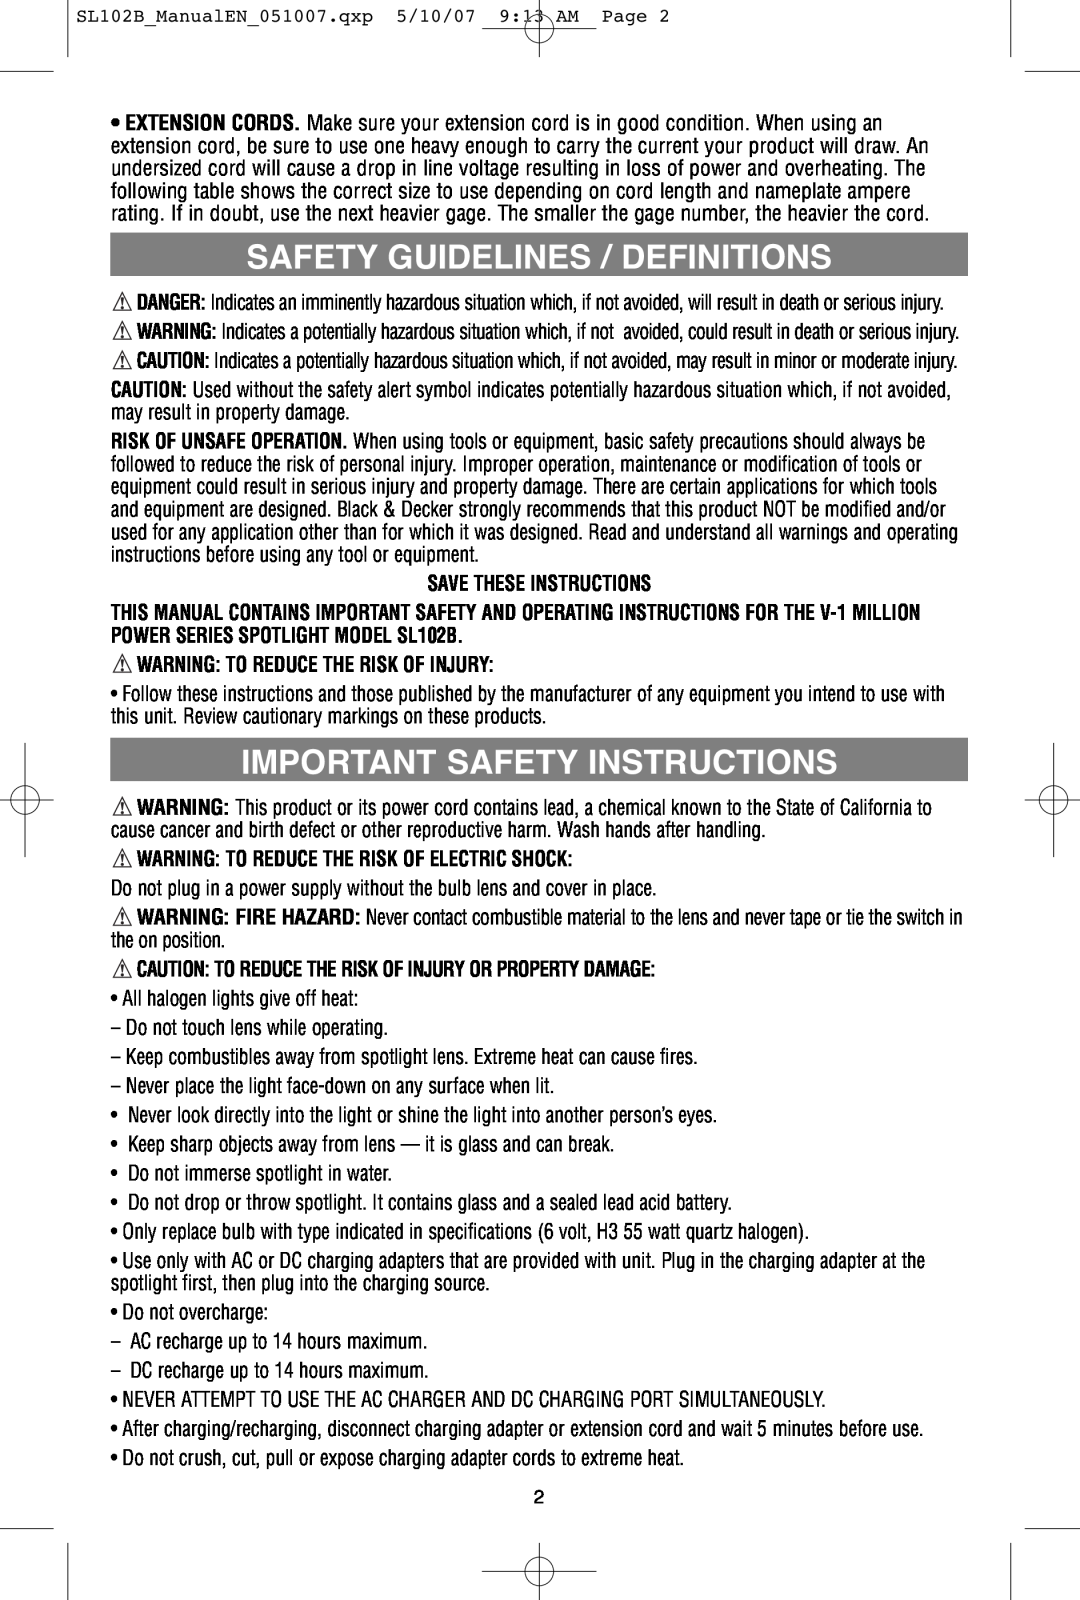 Black & Decker V-1 Million Safety Guidelines / Definitions, Important Safety Instructions, Save These Instructions 